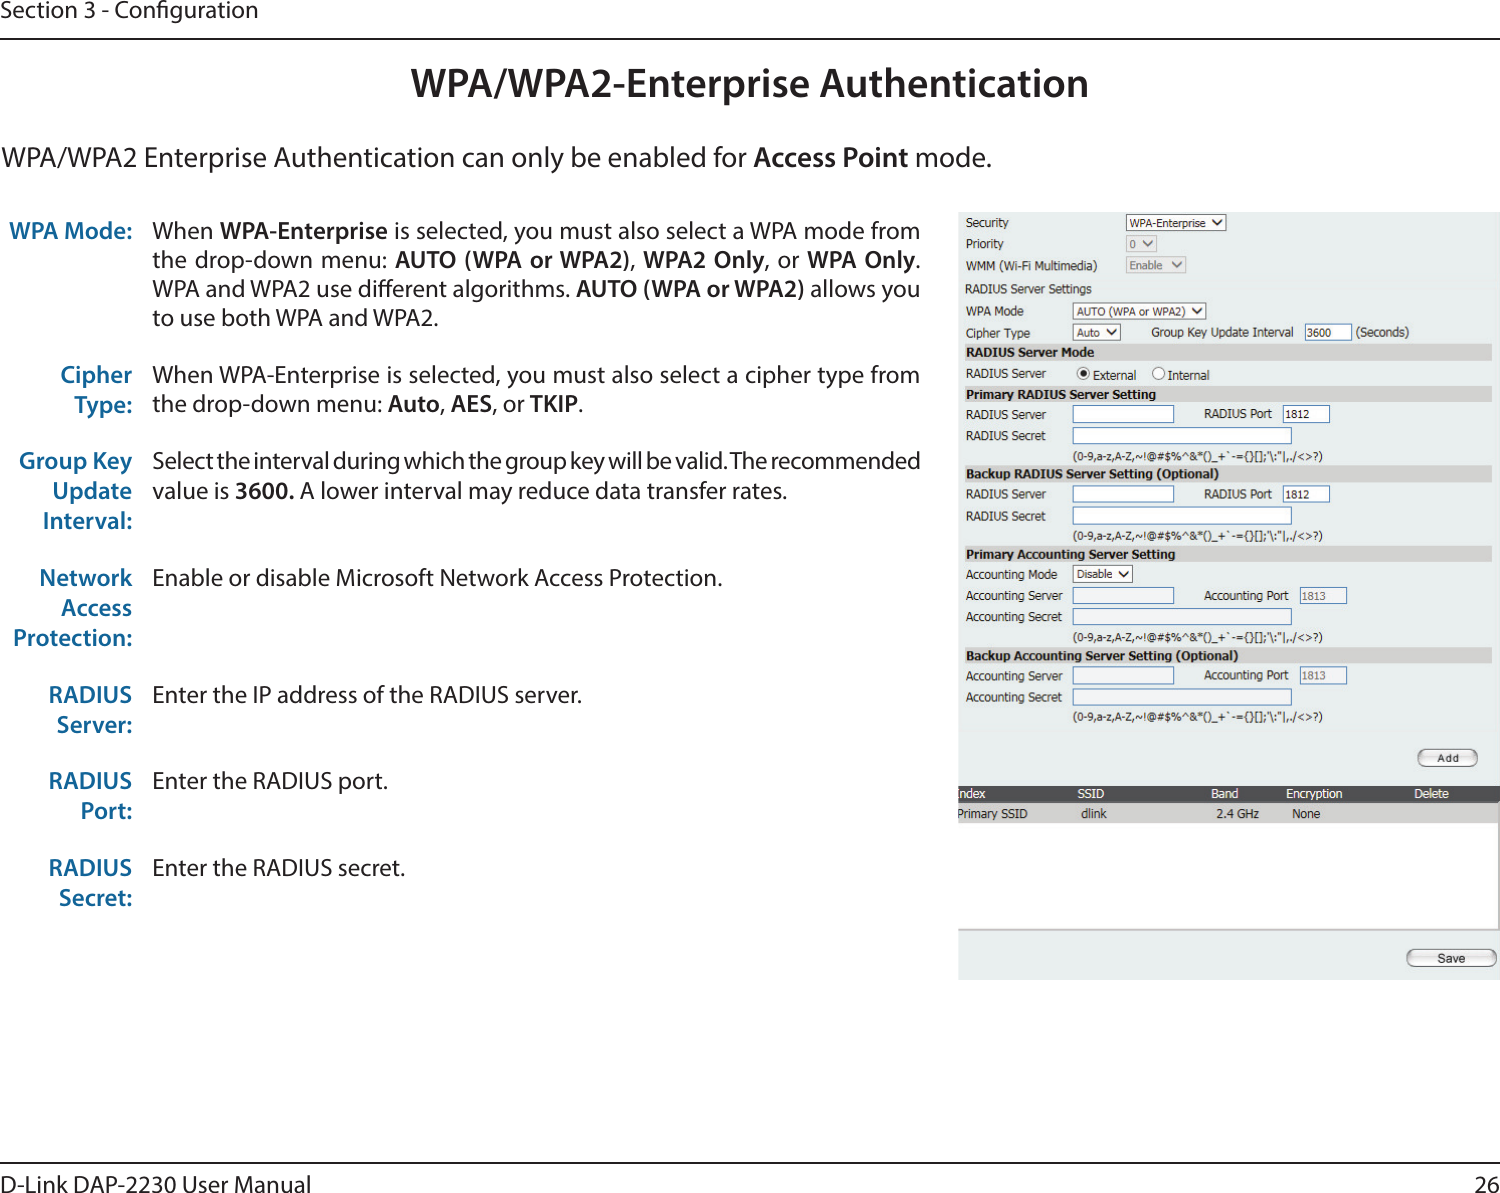 26D-Link DAP-2230 User ManualSection 3 - CongurationWPA/WPA2-Enterprise AuthenticationWPA Mode:  When WPA-Enterprise is selected, you must also select a WPA mode from the drop-down menu: AUTO (WPA or WPA2), WPA2 Only, or WPA Only. WPA and WPA2 use dierent algorithms. AUTO (WPA or WPA2) allows you to use both WPA and WPA2.Cipher Type:When WPA-Enterprise is selected, you must also select a cipher type from the drop-down menu: Auto, AES, or TKIP.Group Key Update Interval:Select the interval during which the group key will be valid. The recommended value is 3600. A lower interval may reduce data transfer rates.Network Access Protection:Enable or disable Microsoft Network Access Protection.RADIUS Server:Enter the IP address of the RADIUS server.RADIUS Port:Enter the RADIUS port.RADIUS Secret:Enter the RADIUS secret.WPA/WPA2 Enterprise Authentication can only be enabled for Access Point mode.